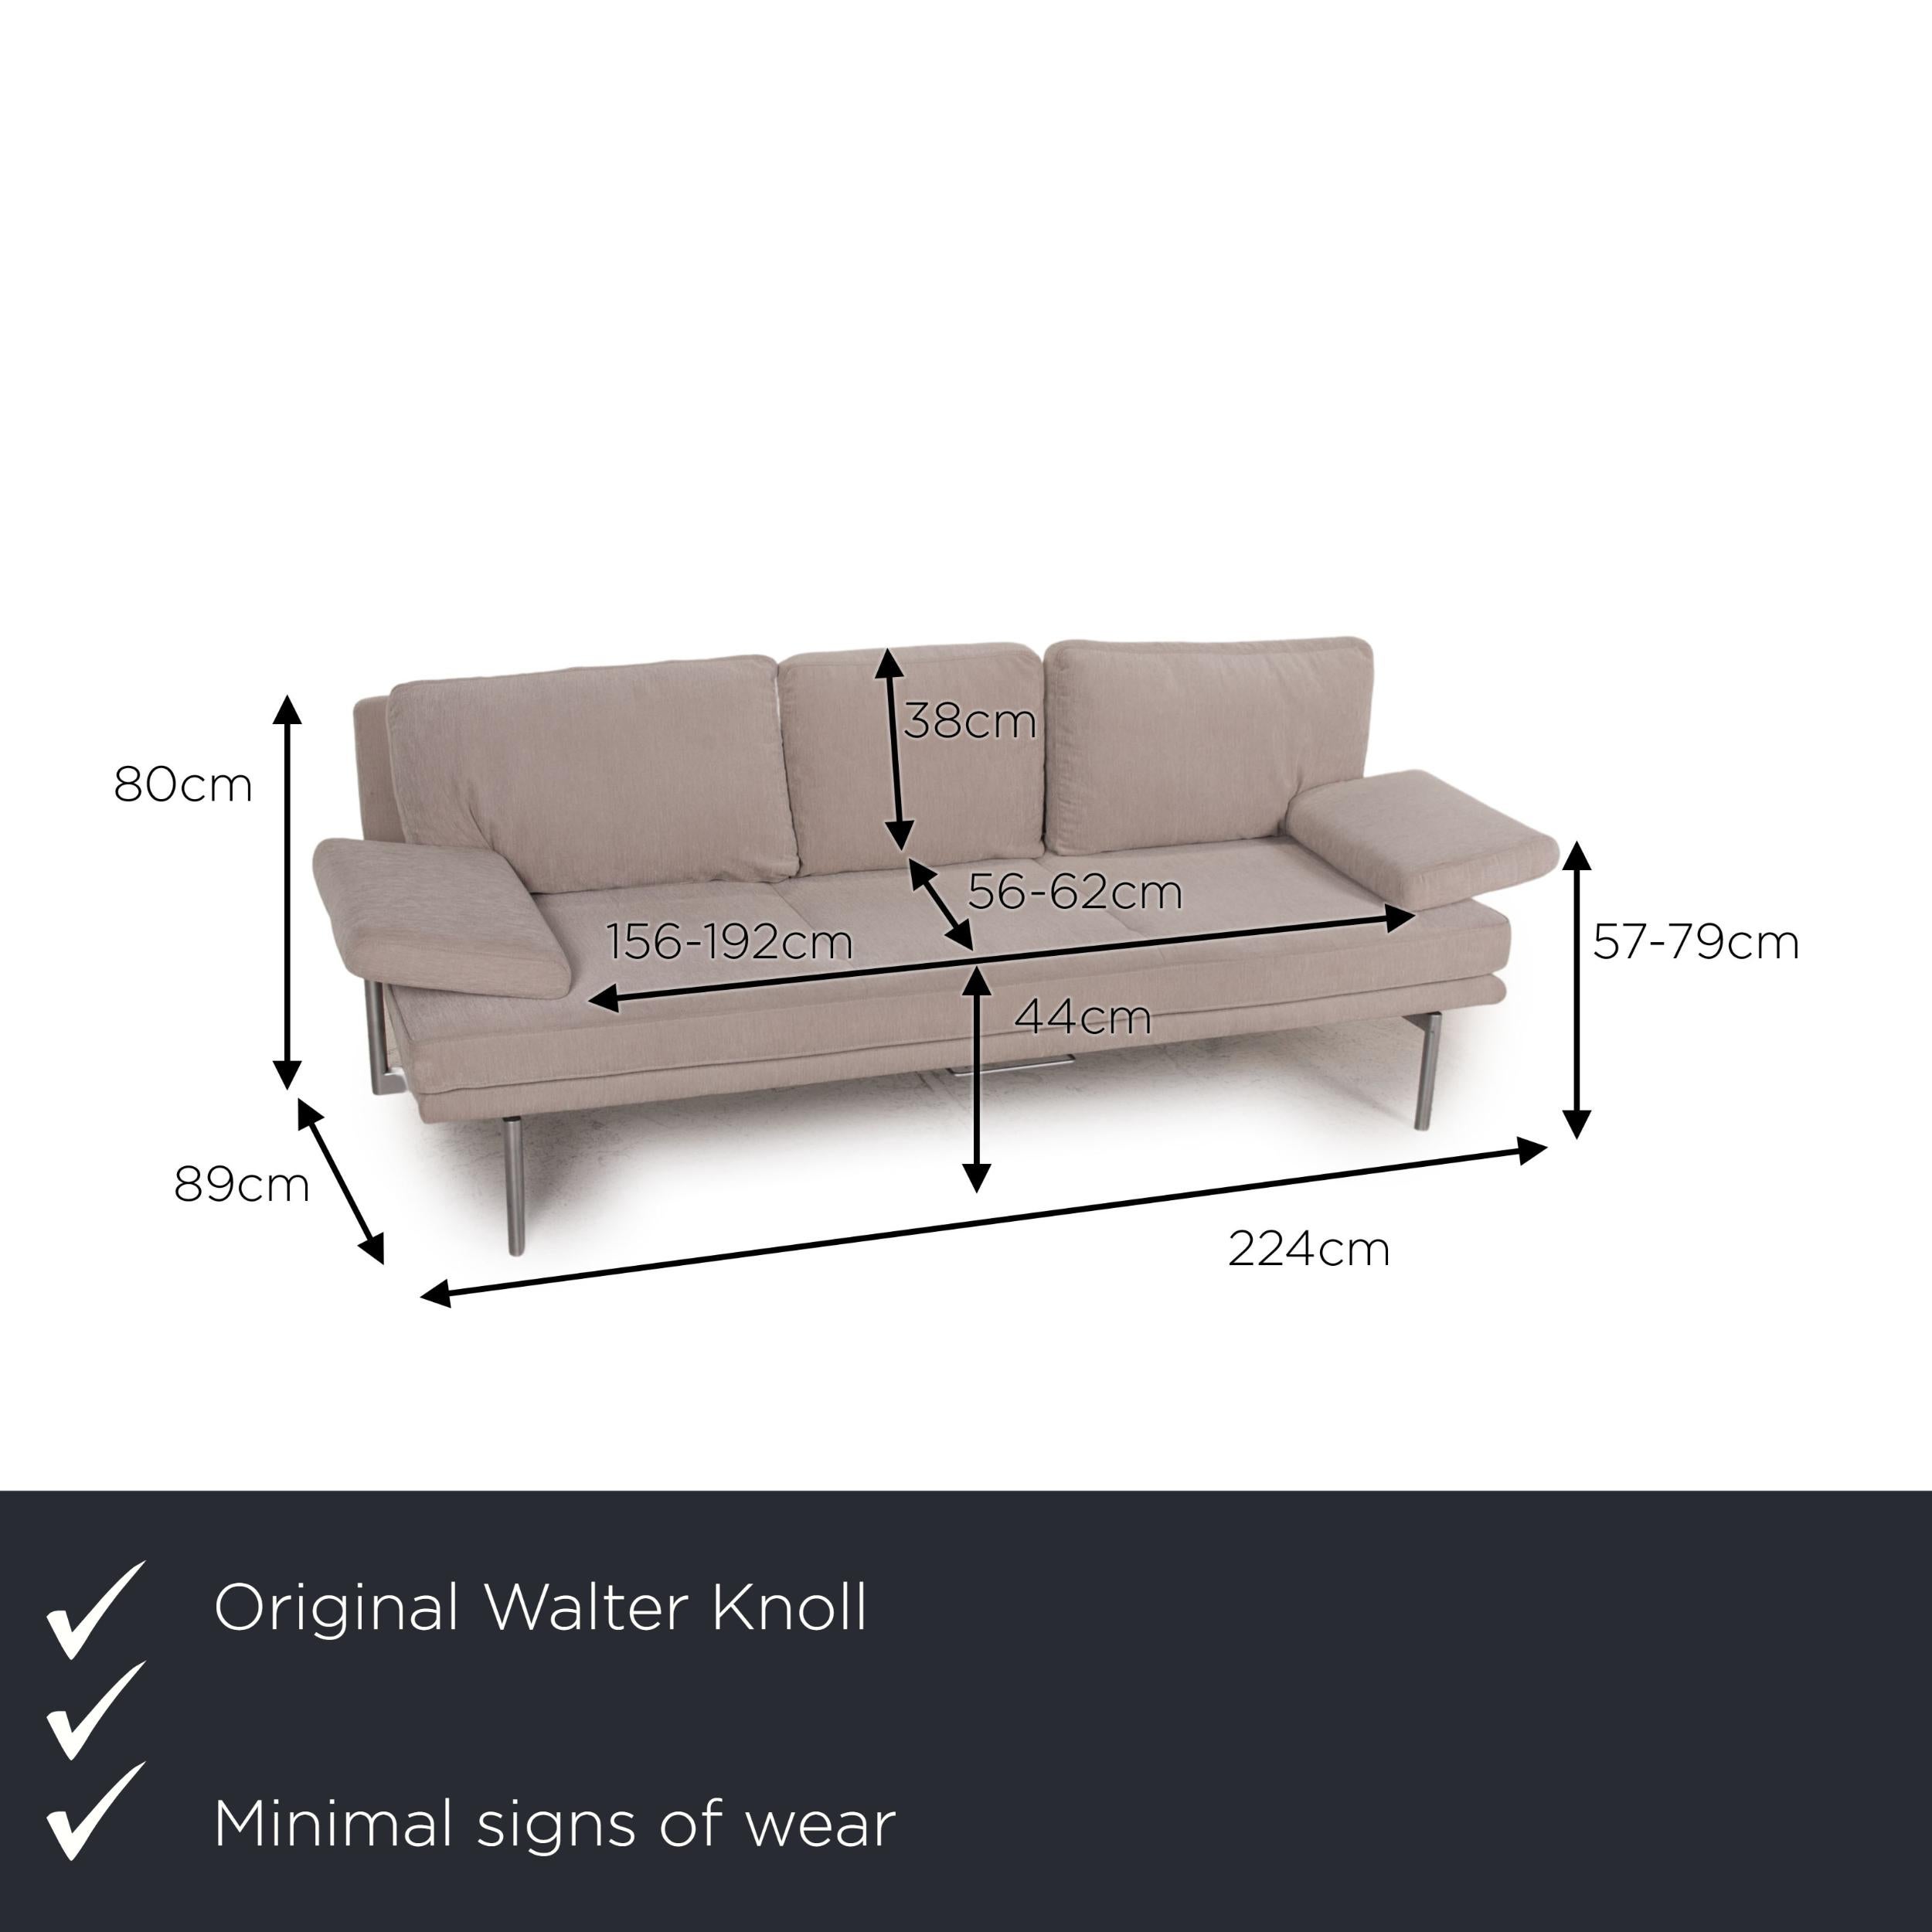 We present to you a Walter Knoll living platform fabric sofa gray three-seater couch.


 Product measurements in centimeters:
 

Depth: 89
Width: 224
Height: 80
Seat height: 44
Rest height: 57
Seat depth: 56
Seat width: 156
Back height: